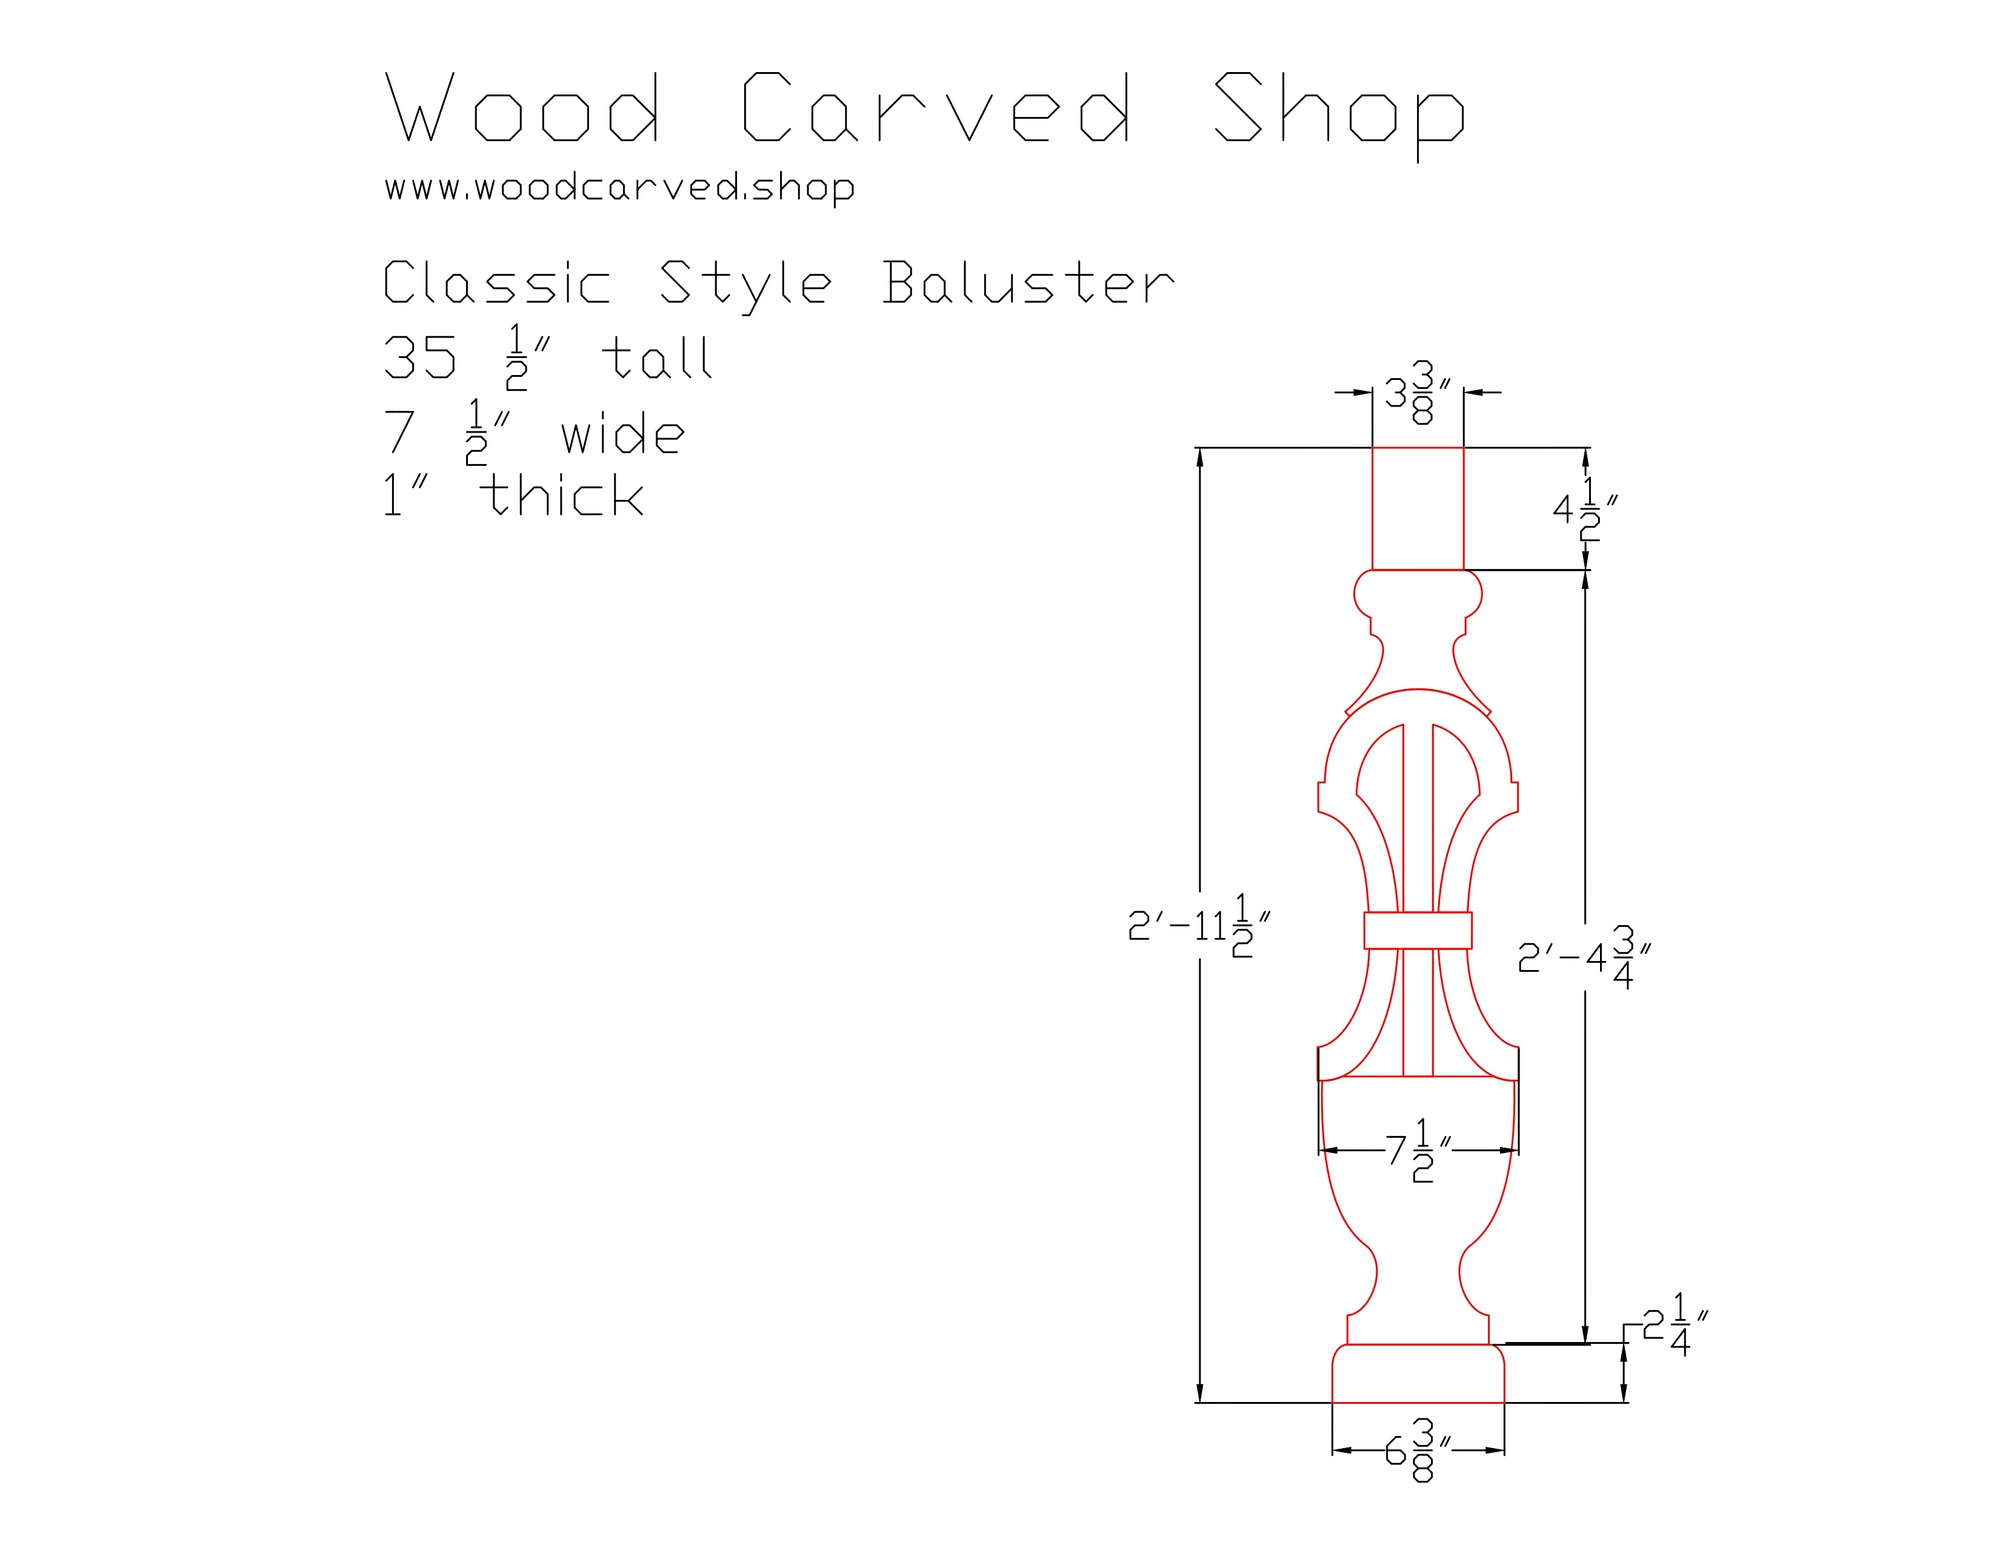 Classic Style Baluster